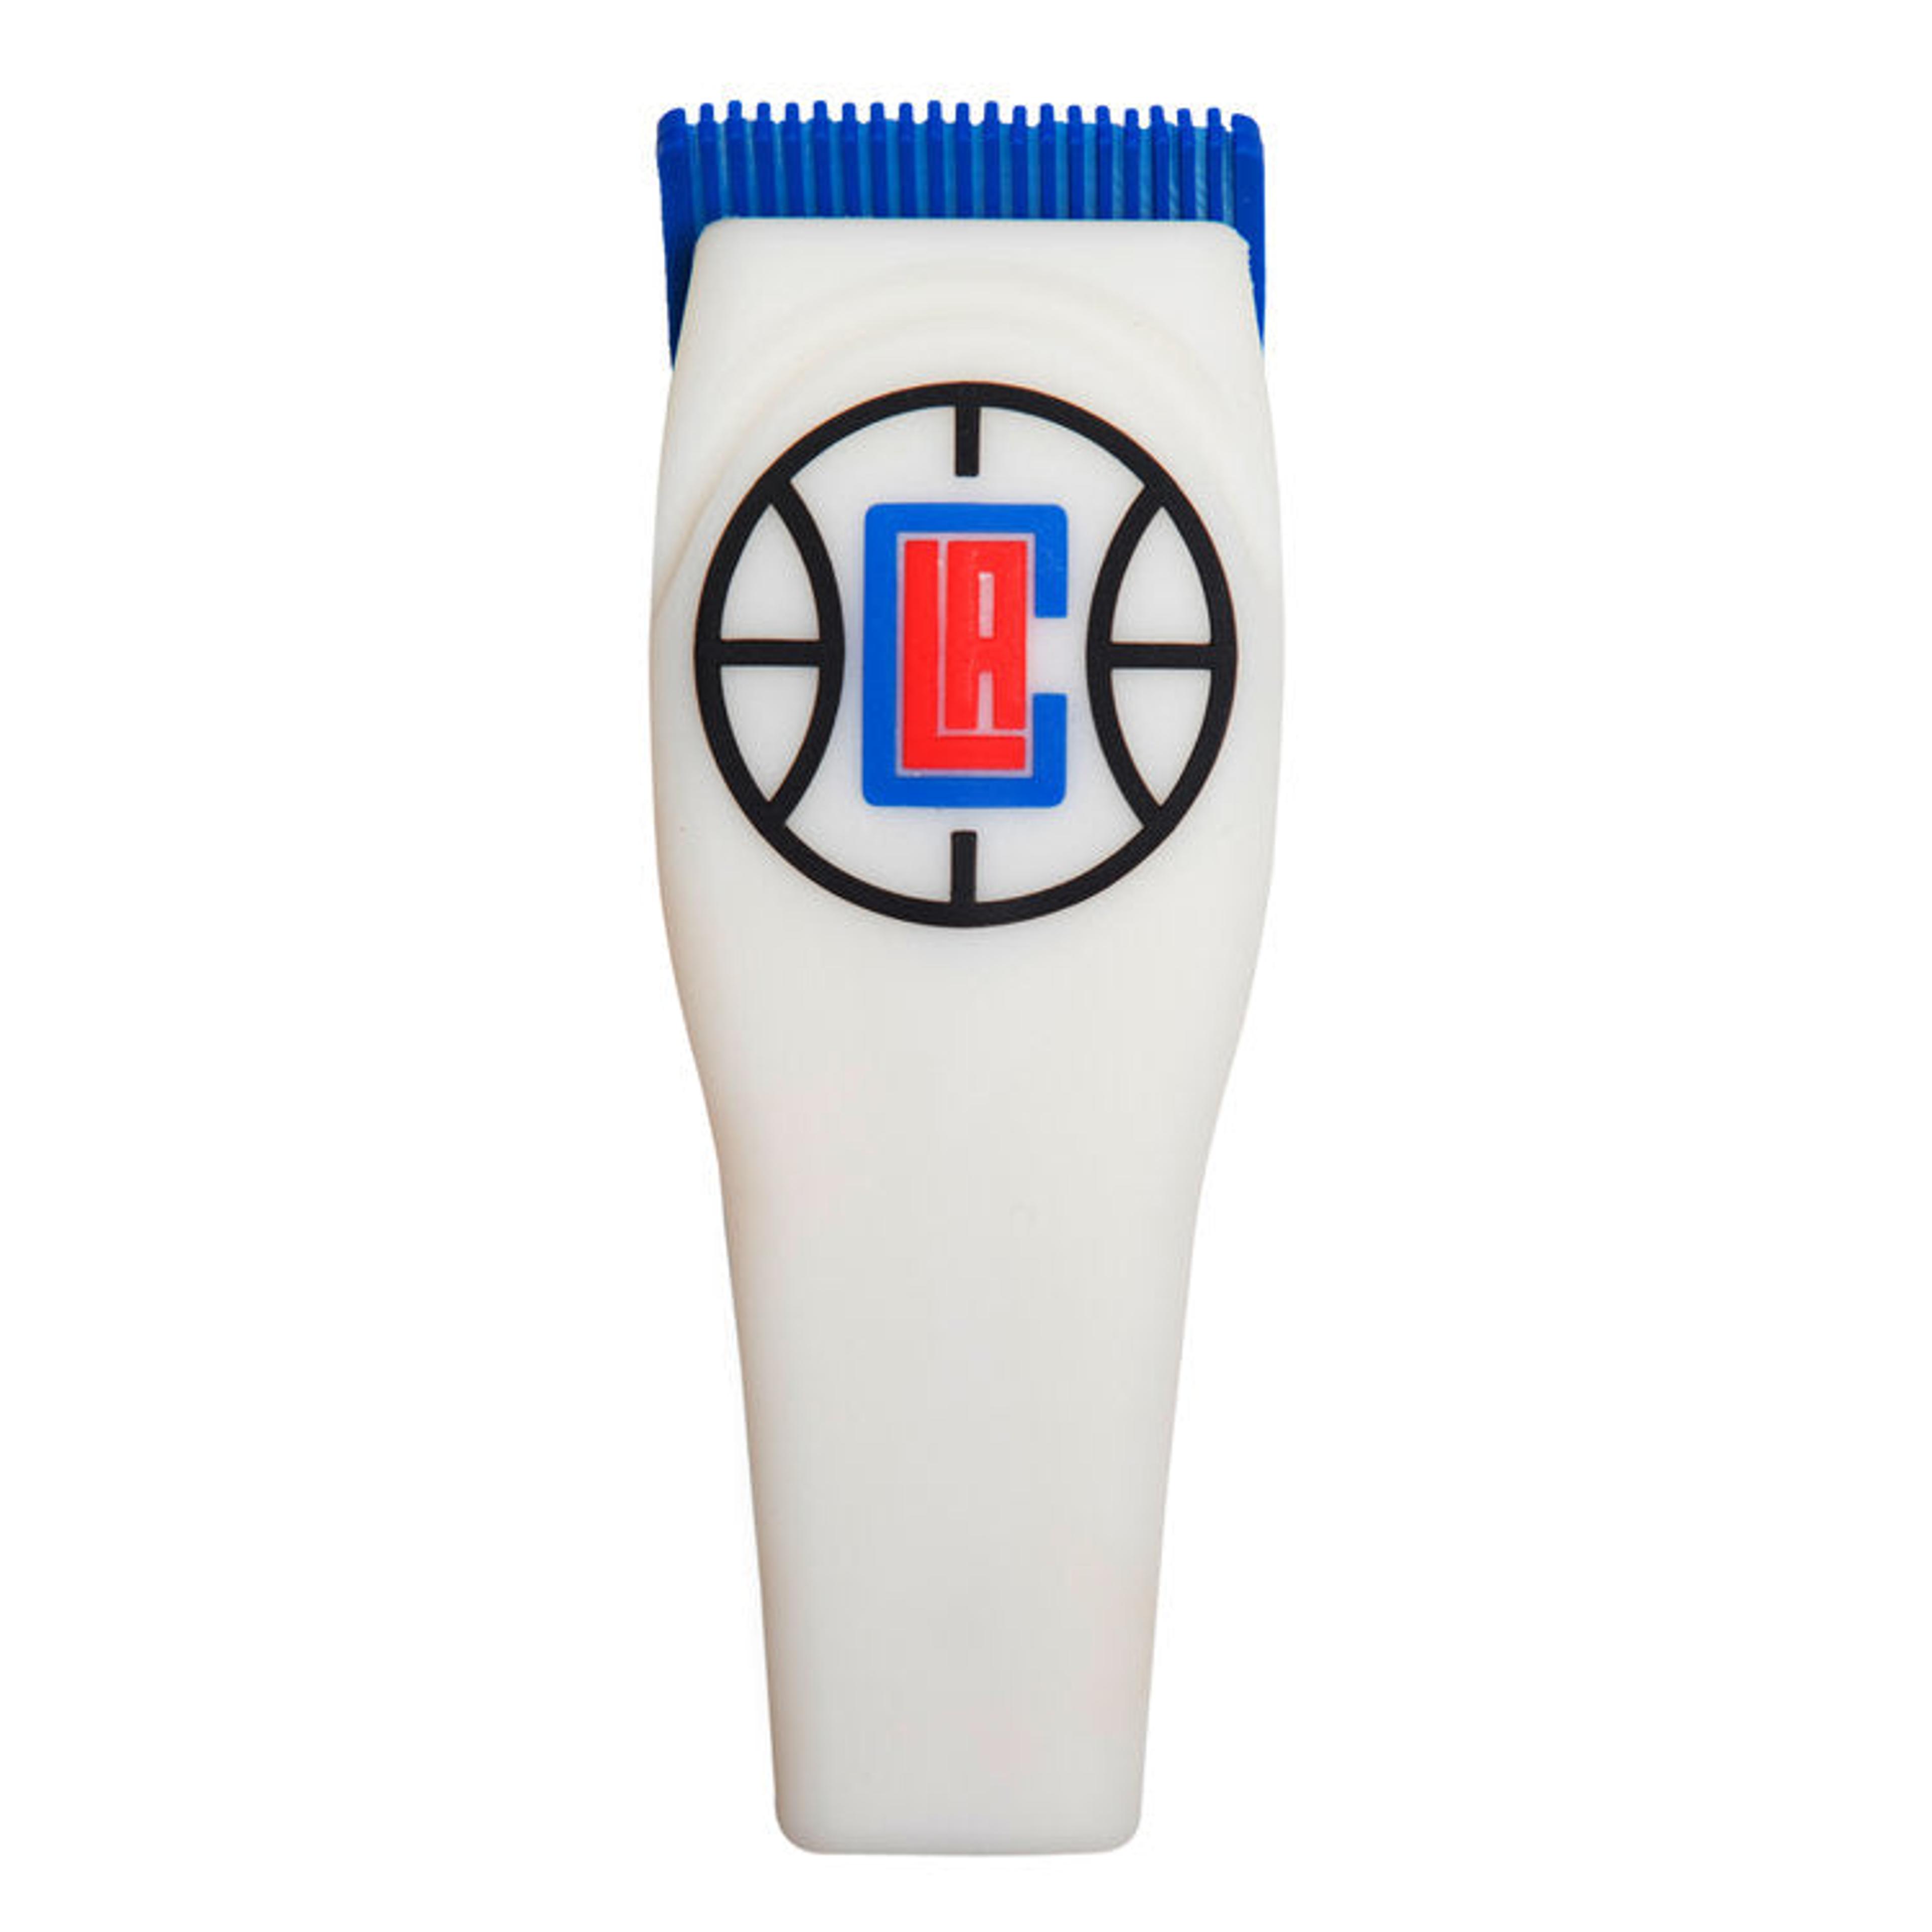 Stay Charged Up - Los Angeles Clippers Portable Charger